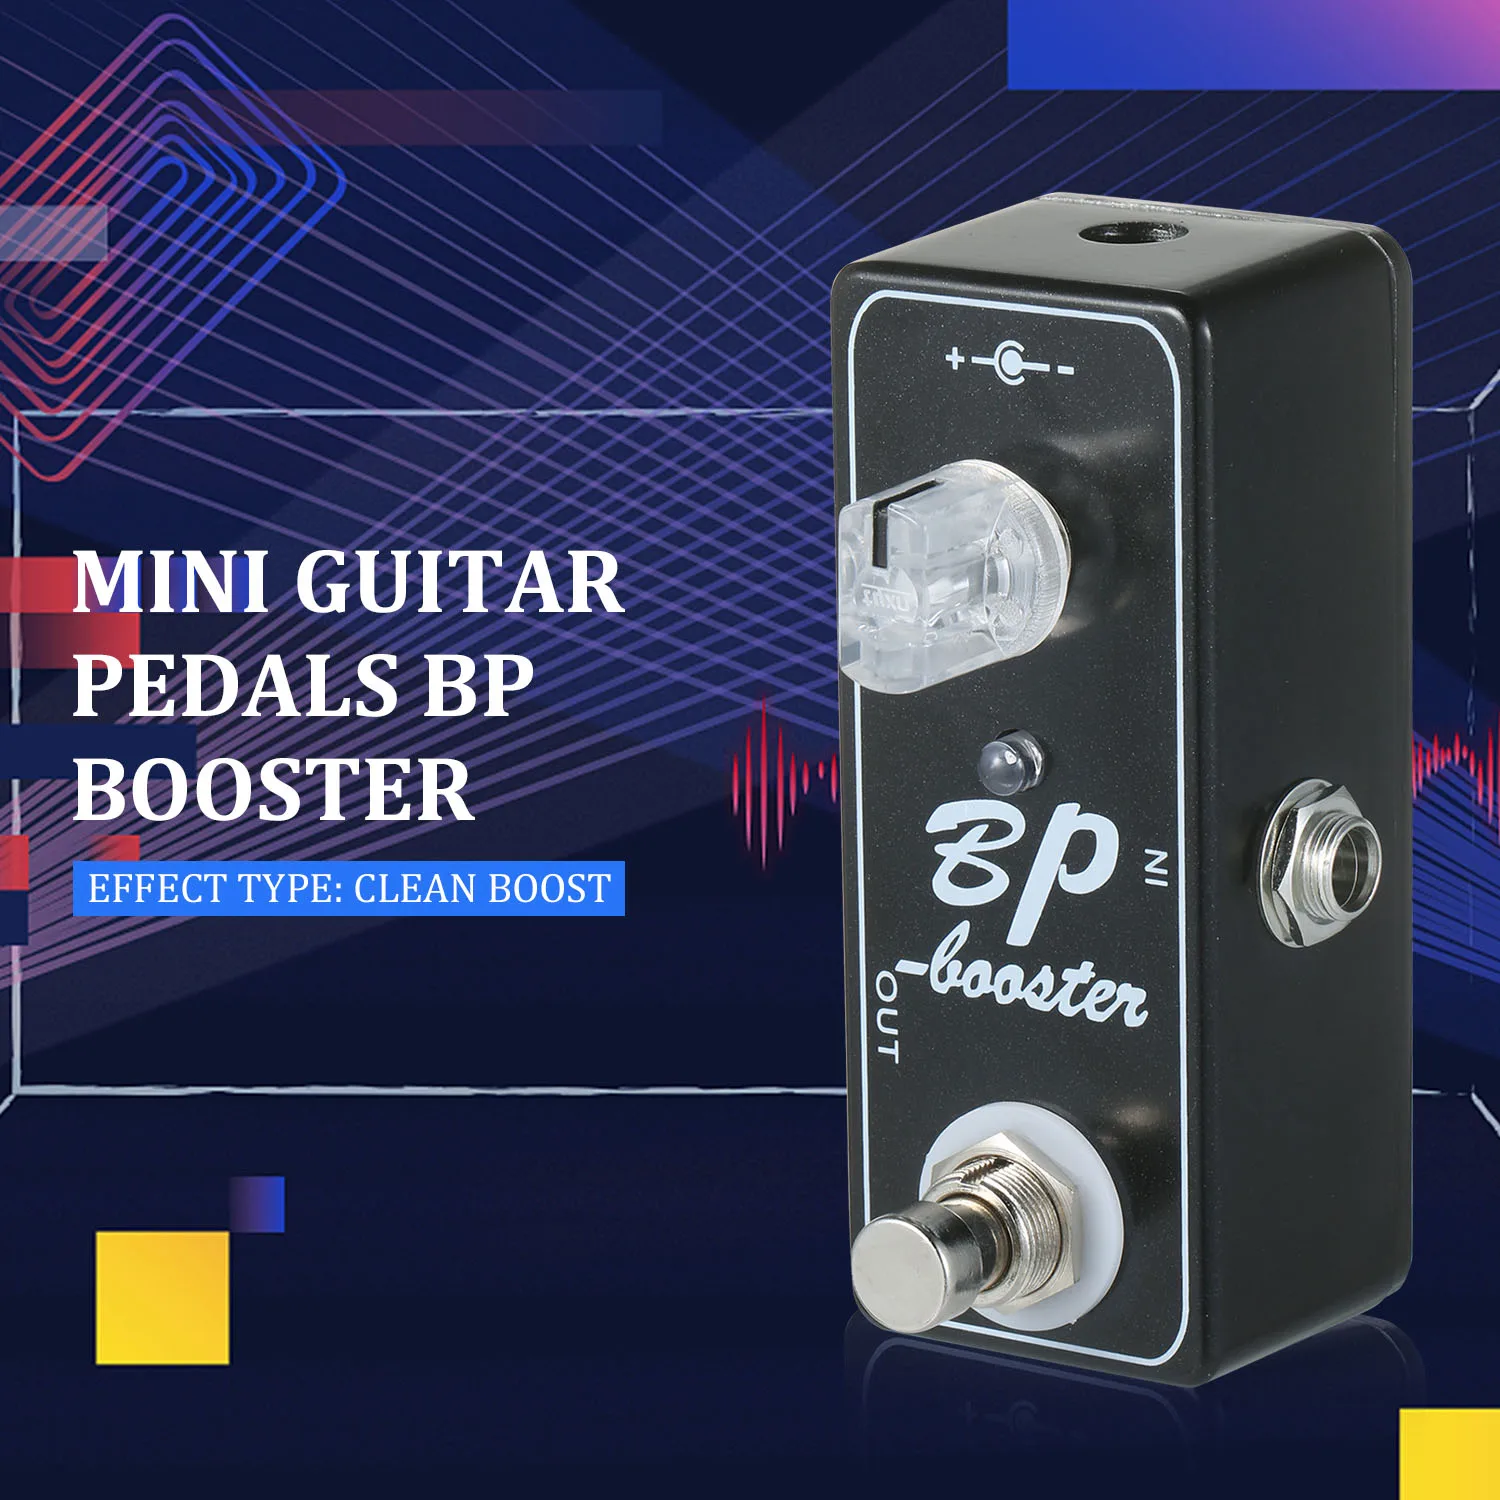 Mini　for　Switching　Effect　Product　Bass　Type　MOSKY　Boost　Guitar　BP　Clean　Electro-acoustic　Pedals　Audio　Bypass　Guitar　Booster　True　AliExpress